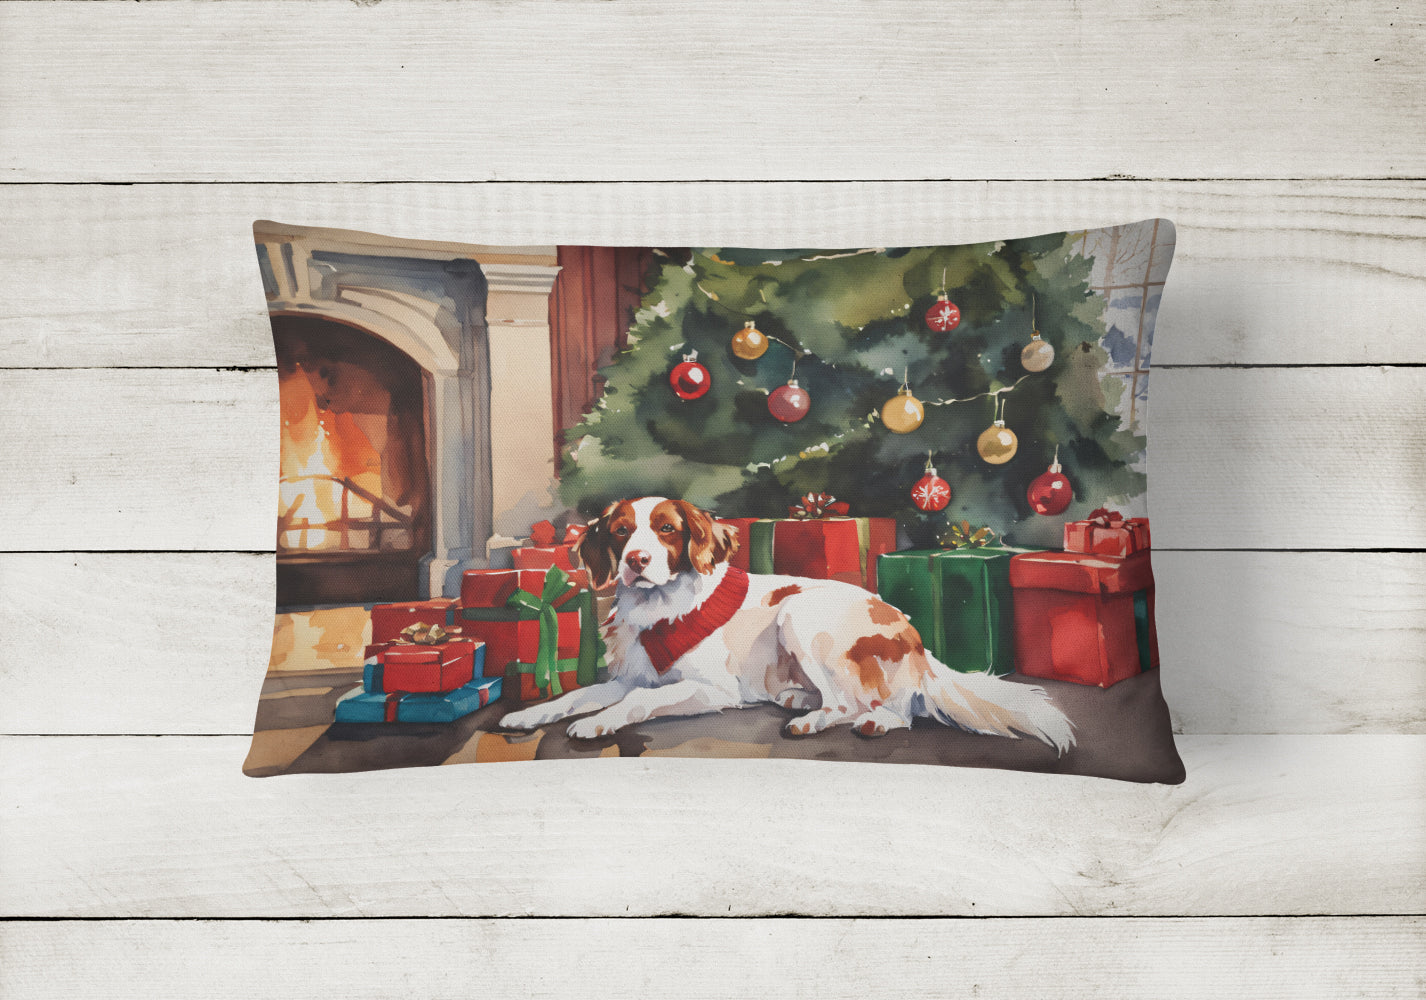 Buy this Brittany Cozy Christmas Throw Pillow